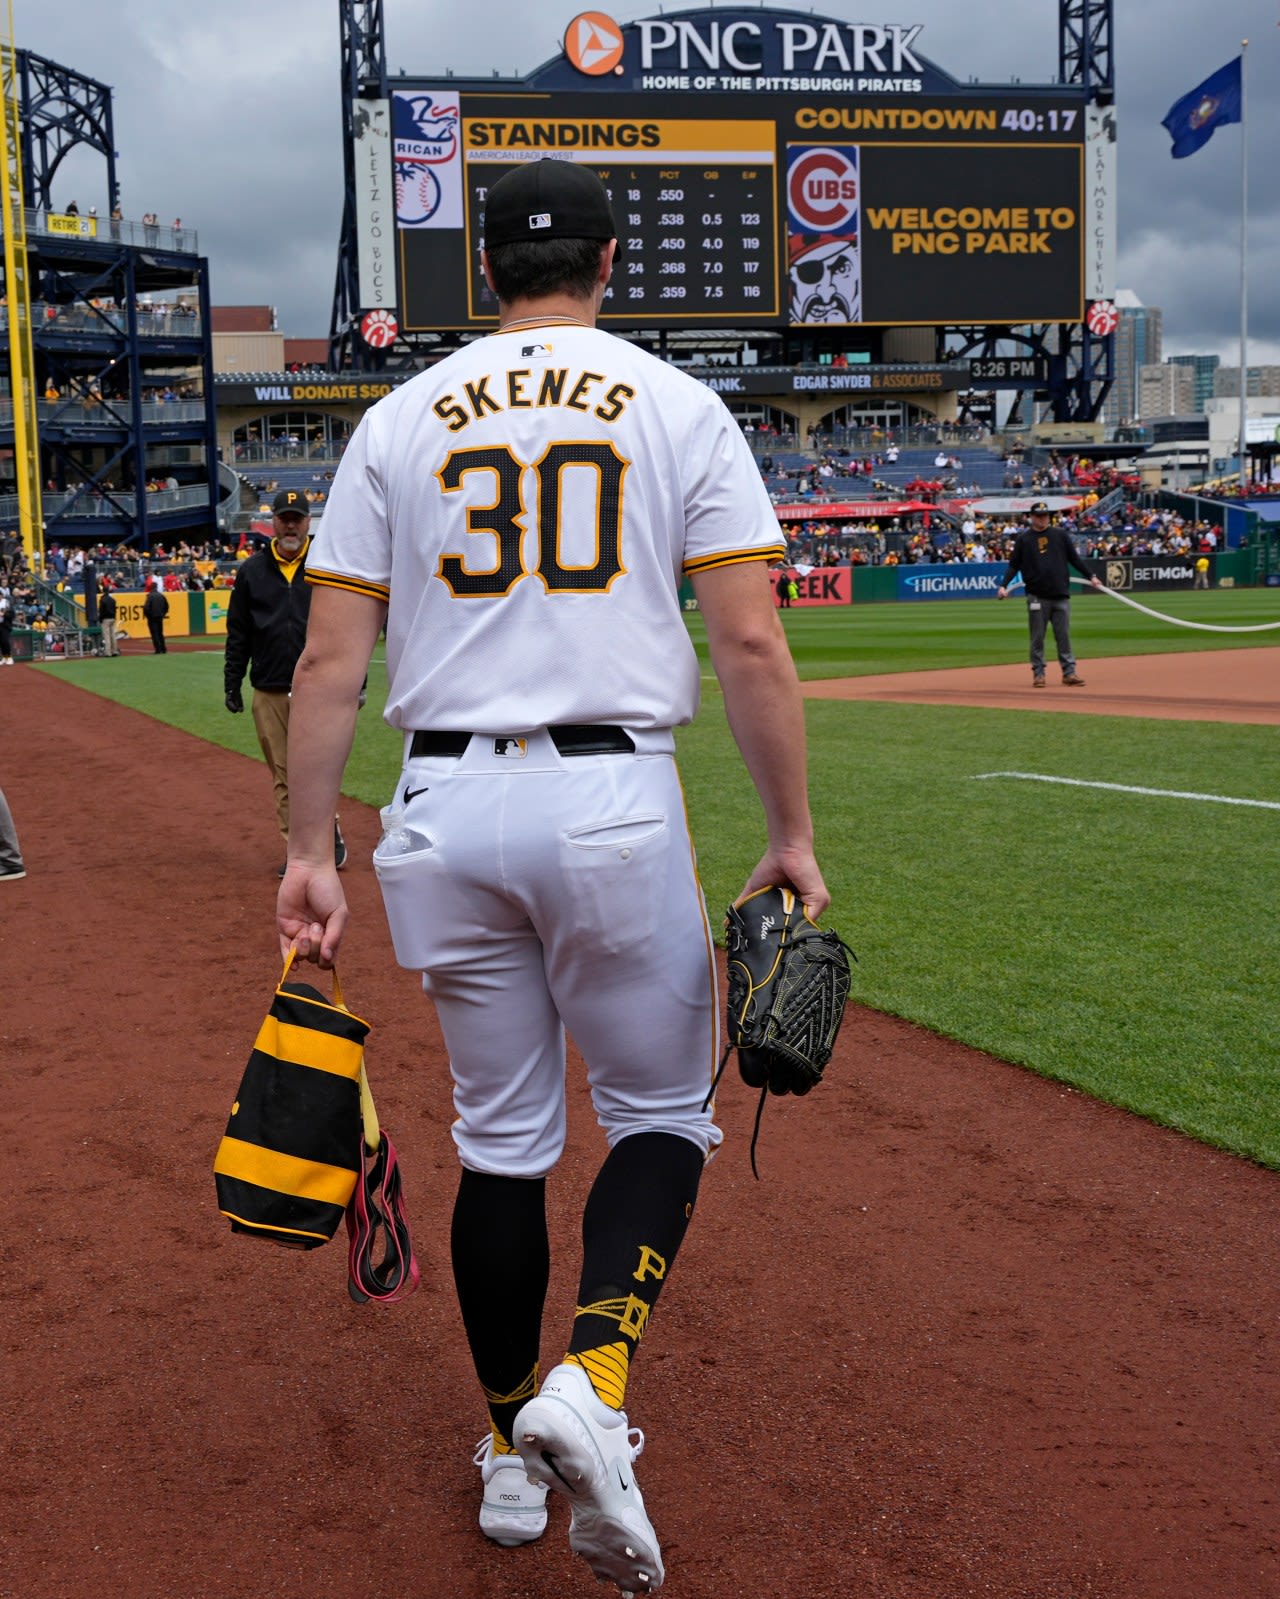 Pirates’ Paul Skenes hits triple digits 17 times, strikes out 7 in big league debut vs. Cubs